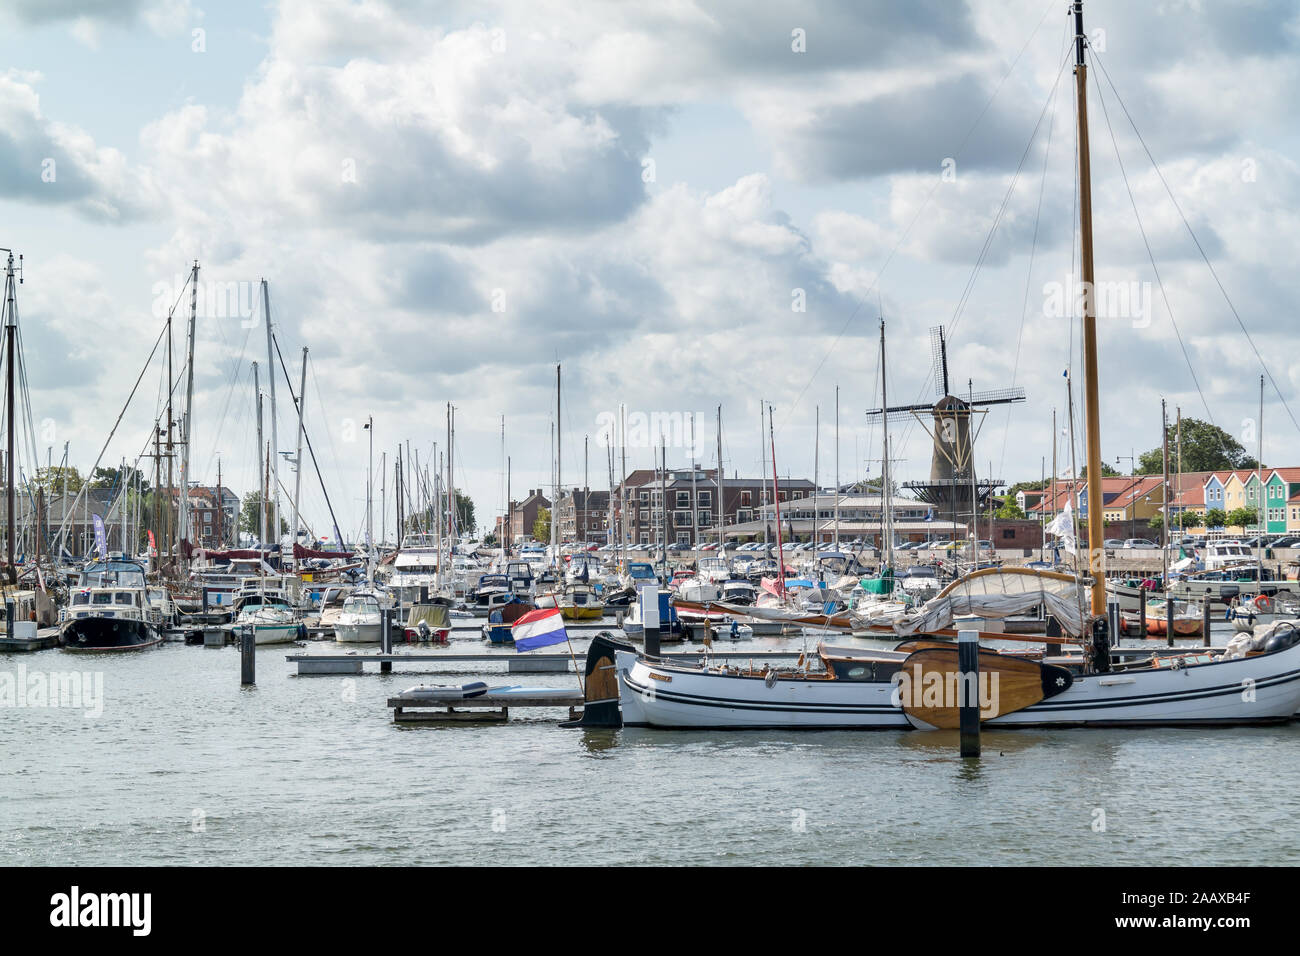 Yachts and windmill in the harbour of Hellevoetsluis, Netherlands Stock Photo